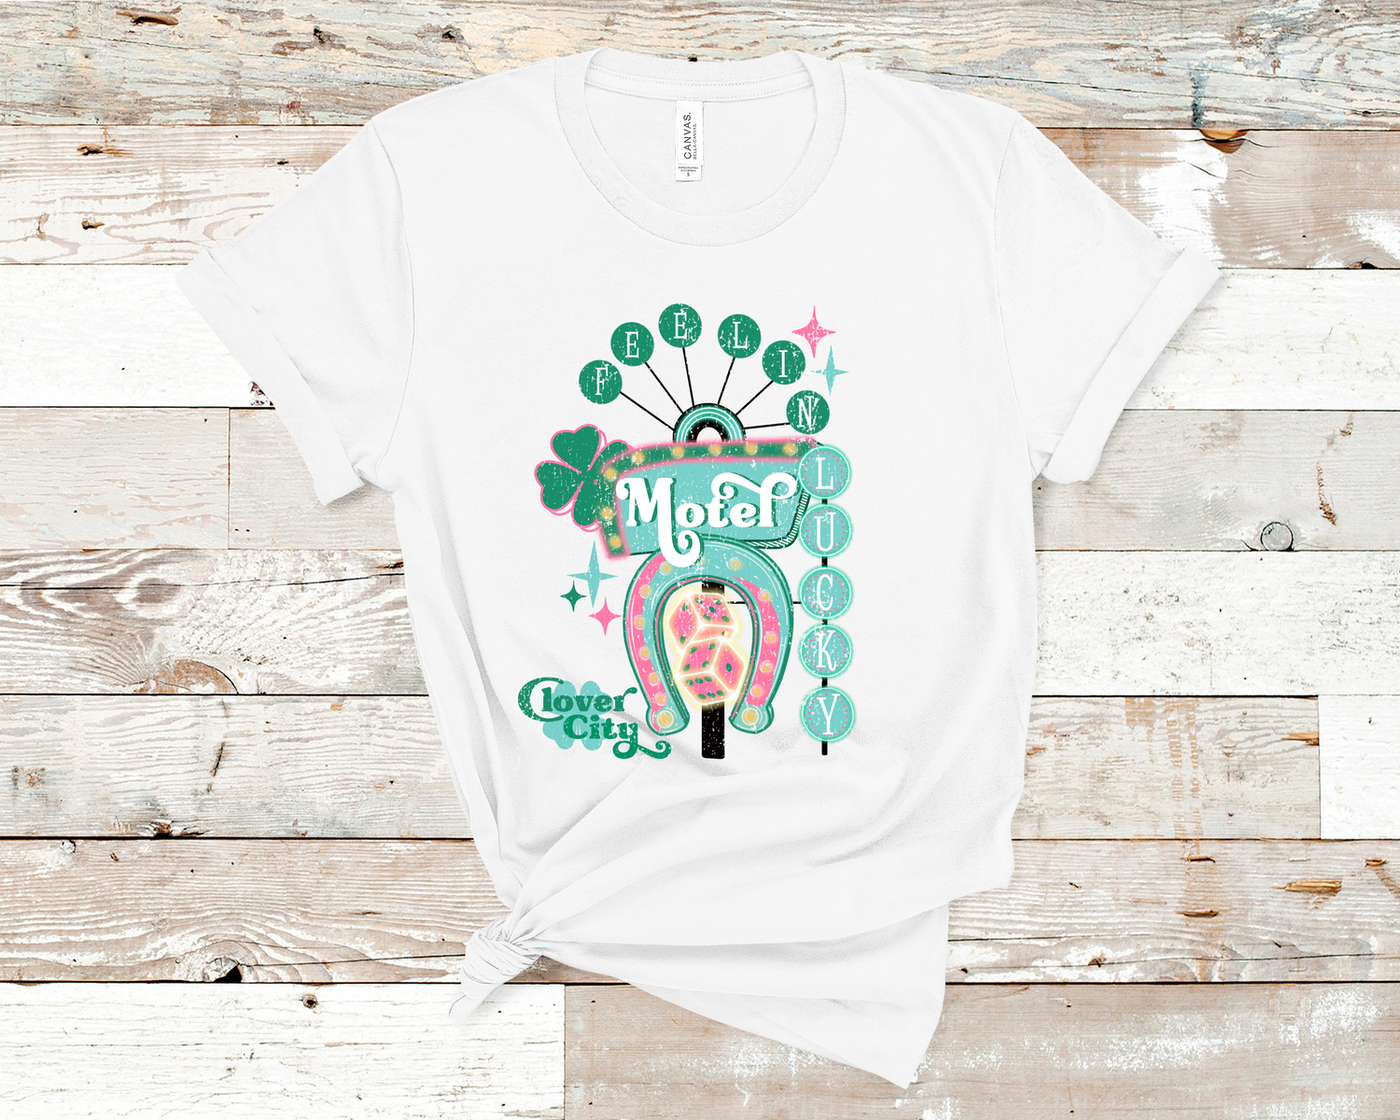 White Tee. Graphic of a vintage Neon Sign The word feeling with each letter in green circles at the top with the word lucky down the side with each letter in a turquoise circle. There is a sign in the center with the word motel in it, underneath there is a horse shoe with dice inside at he bottom of the sign. There is also a four leaf clover with the word clover city over it in green.